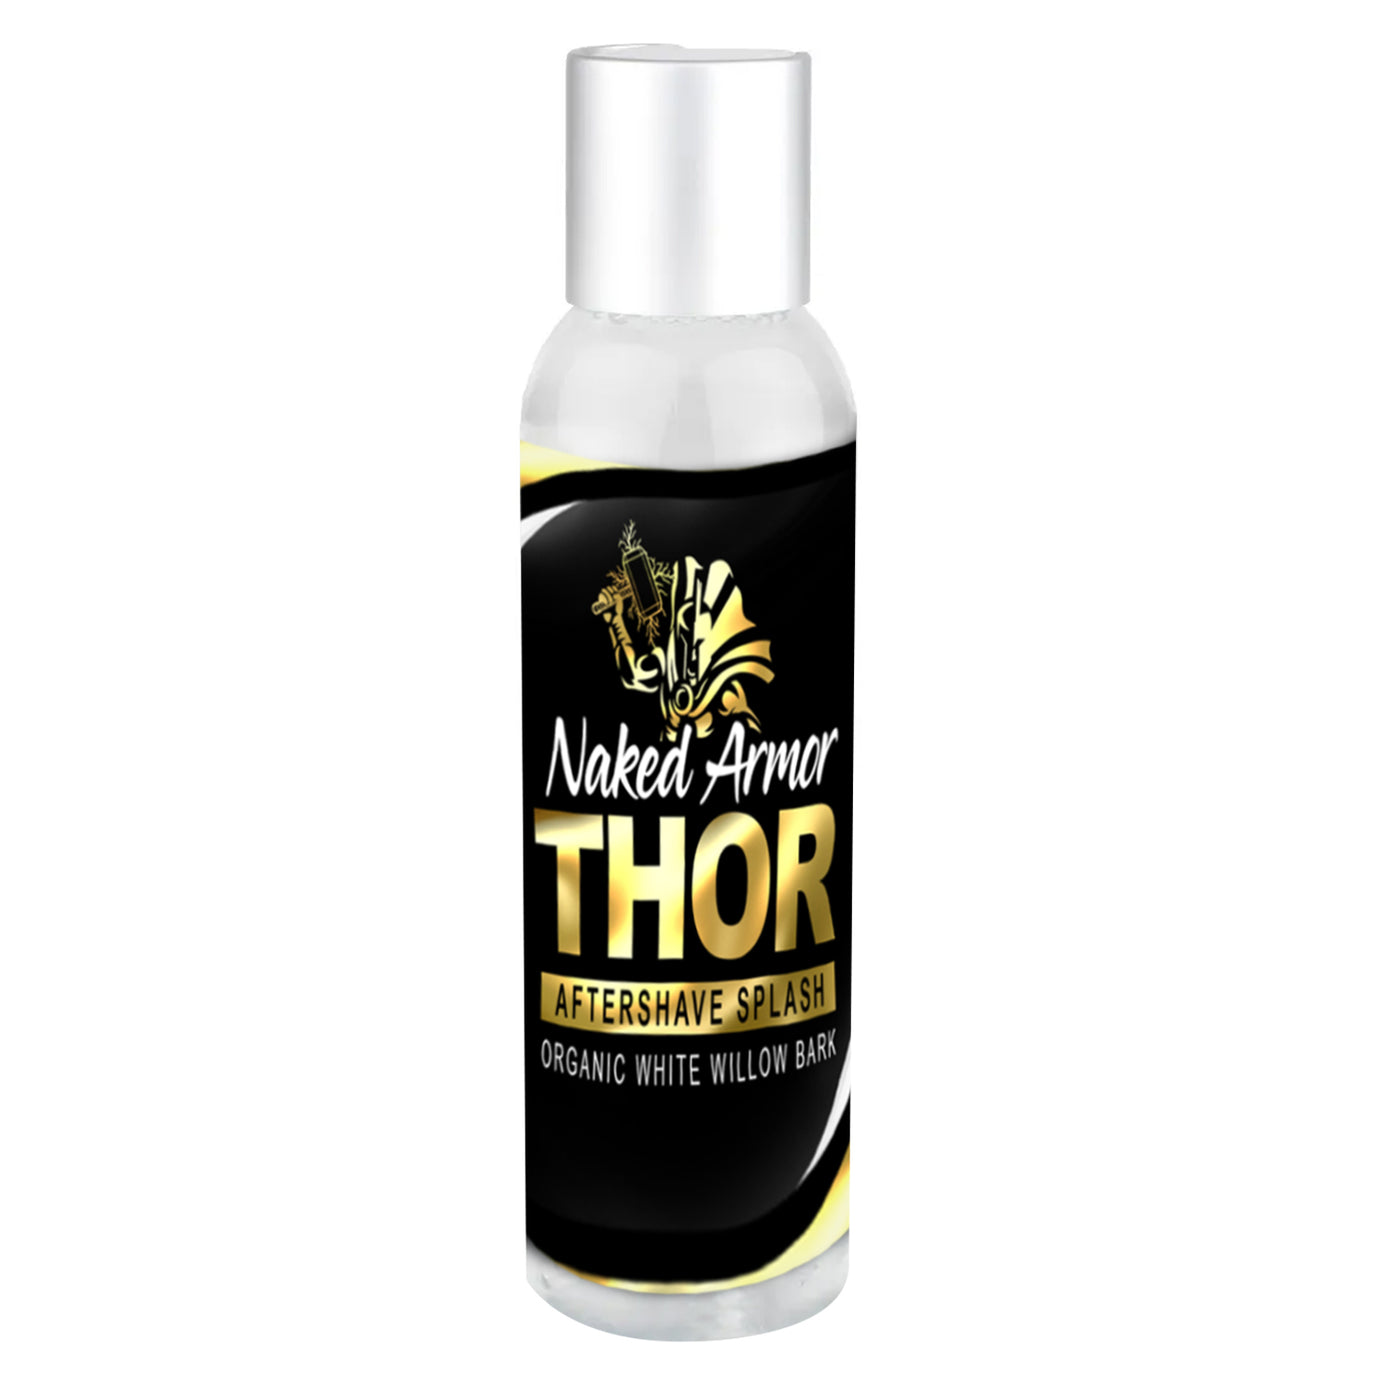  Thor Aftershave Splash by Naked Armor sold by Naked Armor Razors